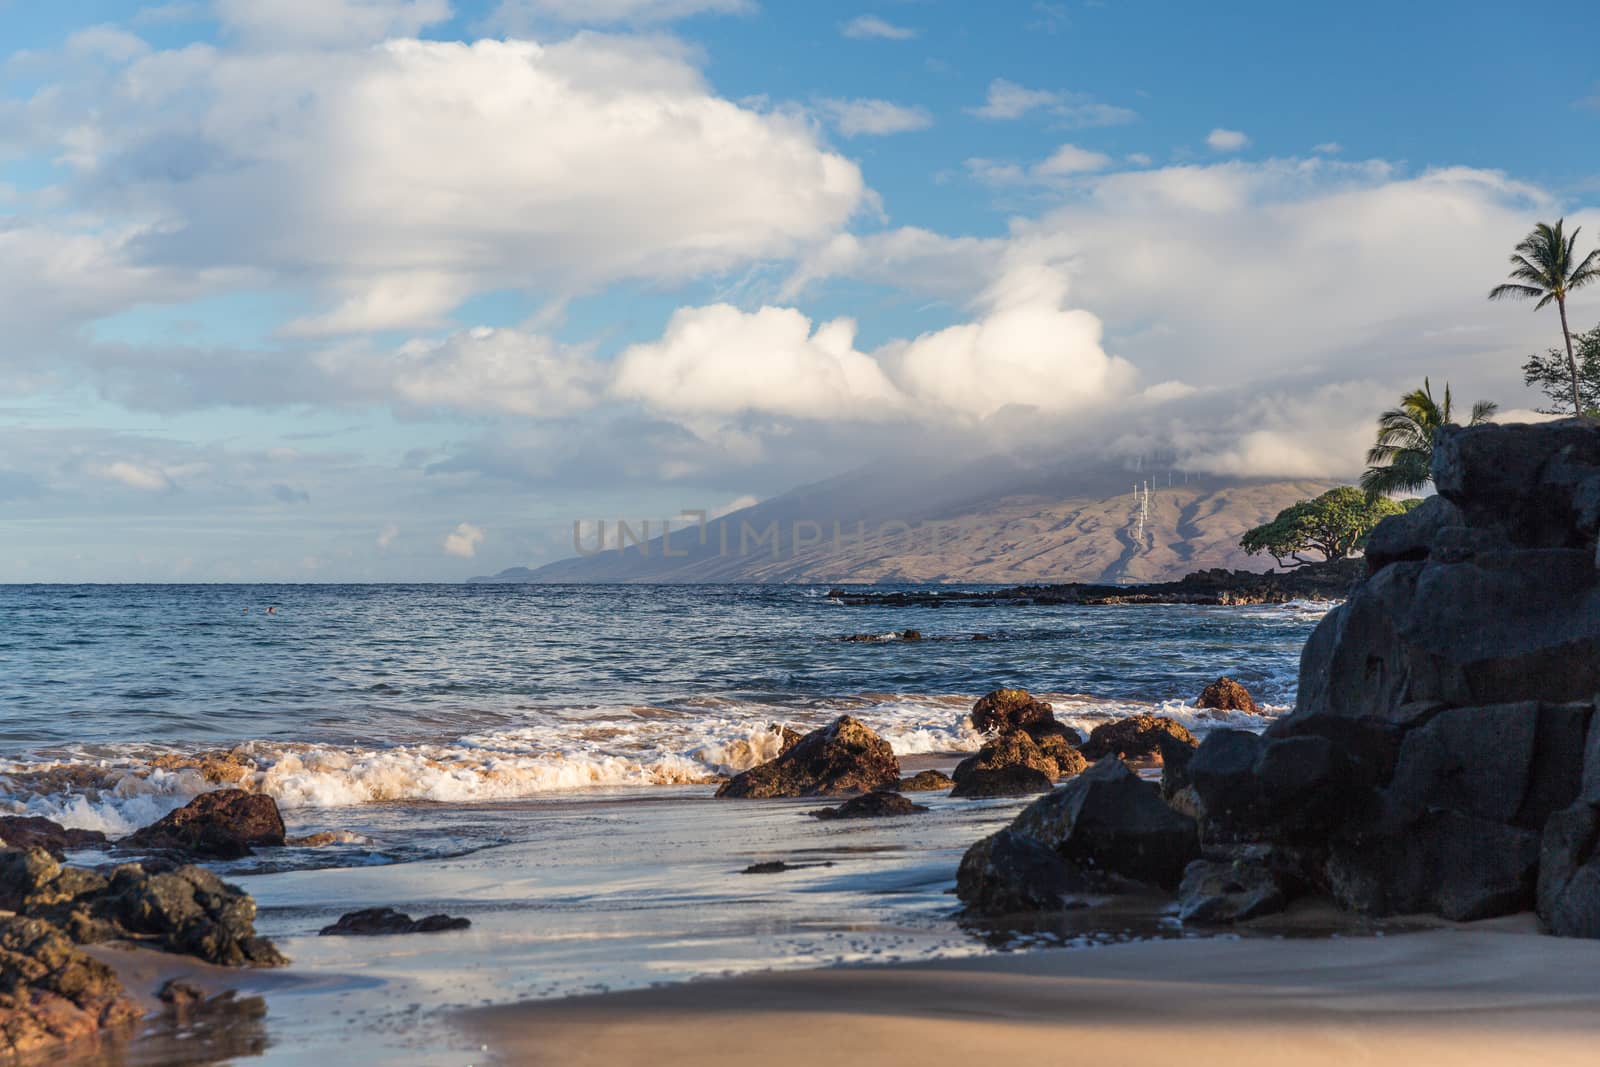 The beach and rocks in Maui Hawaii by chrisukphoto